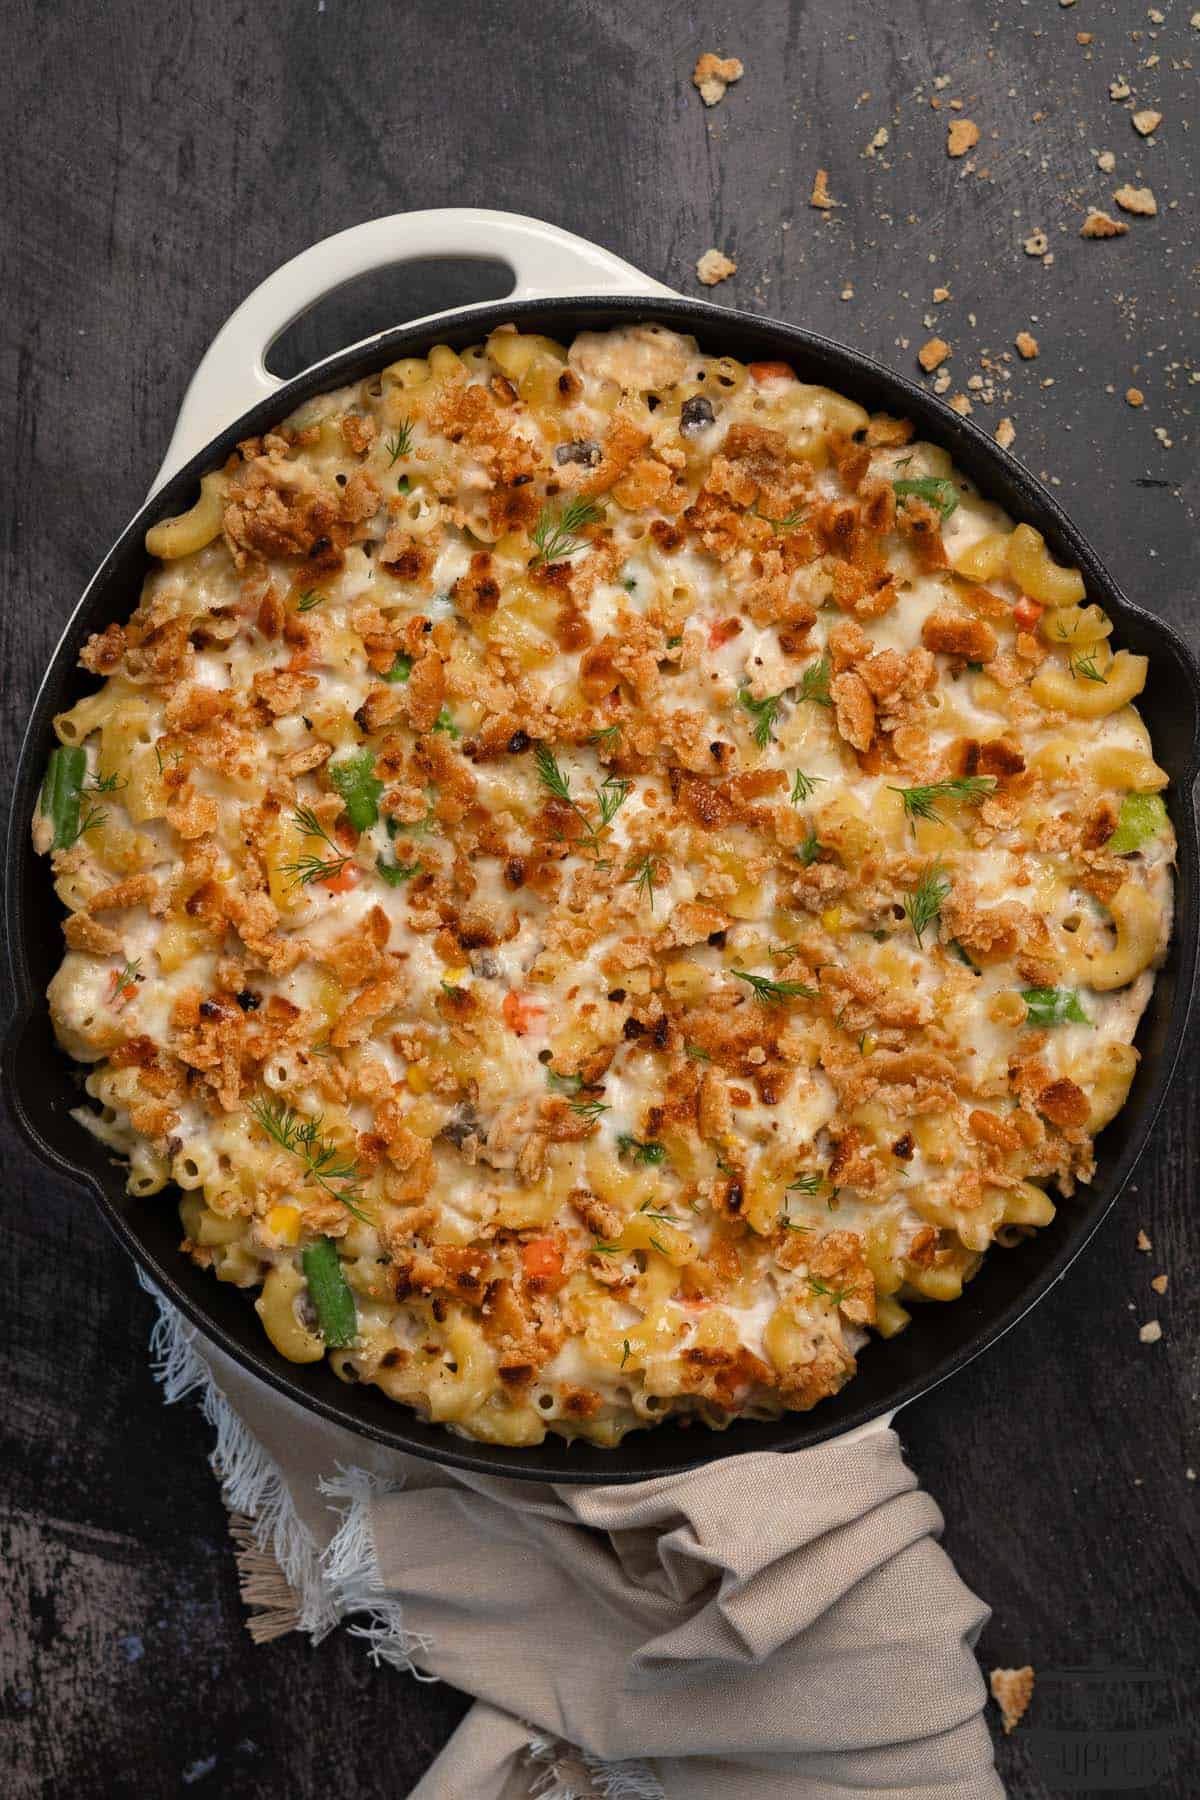 a fully baked tuna noodle casserole in a baking pan